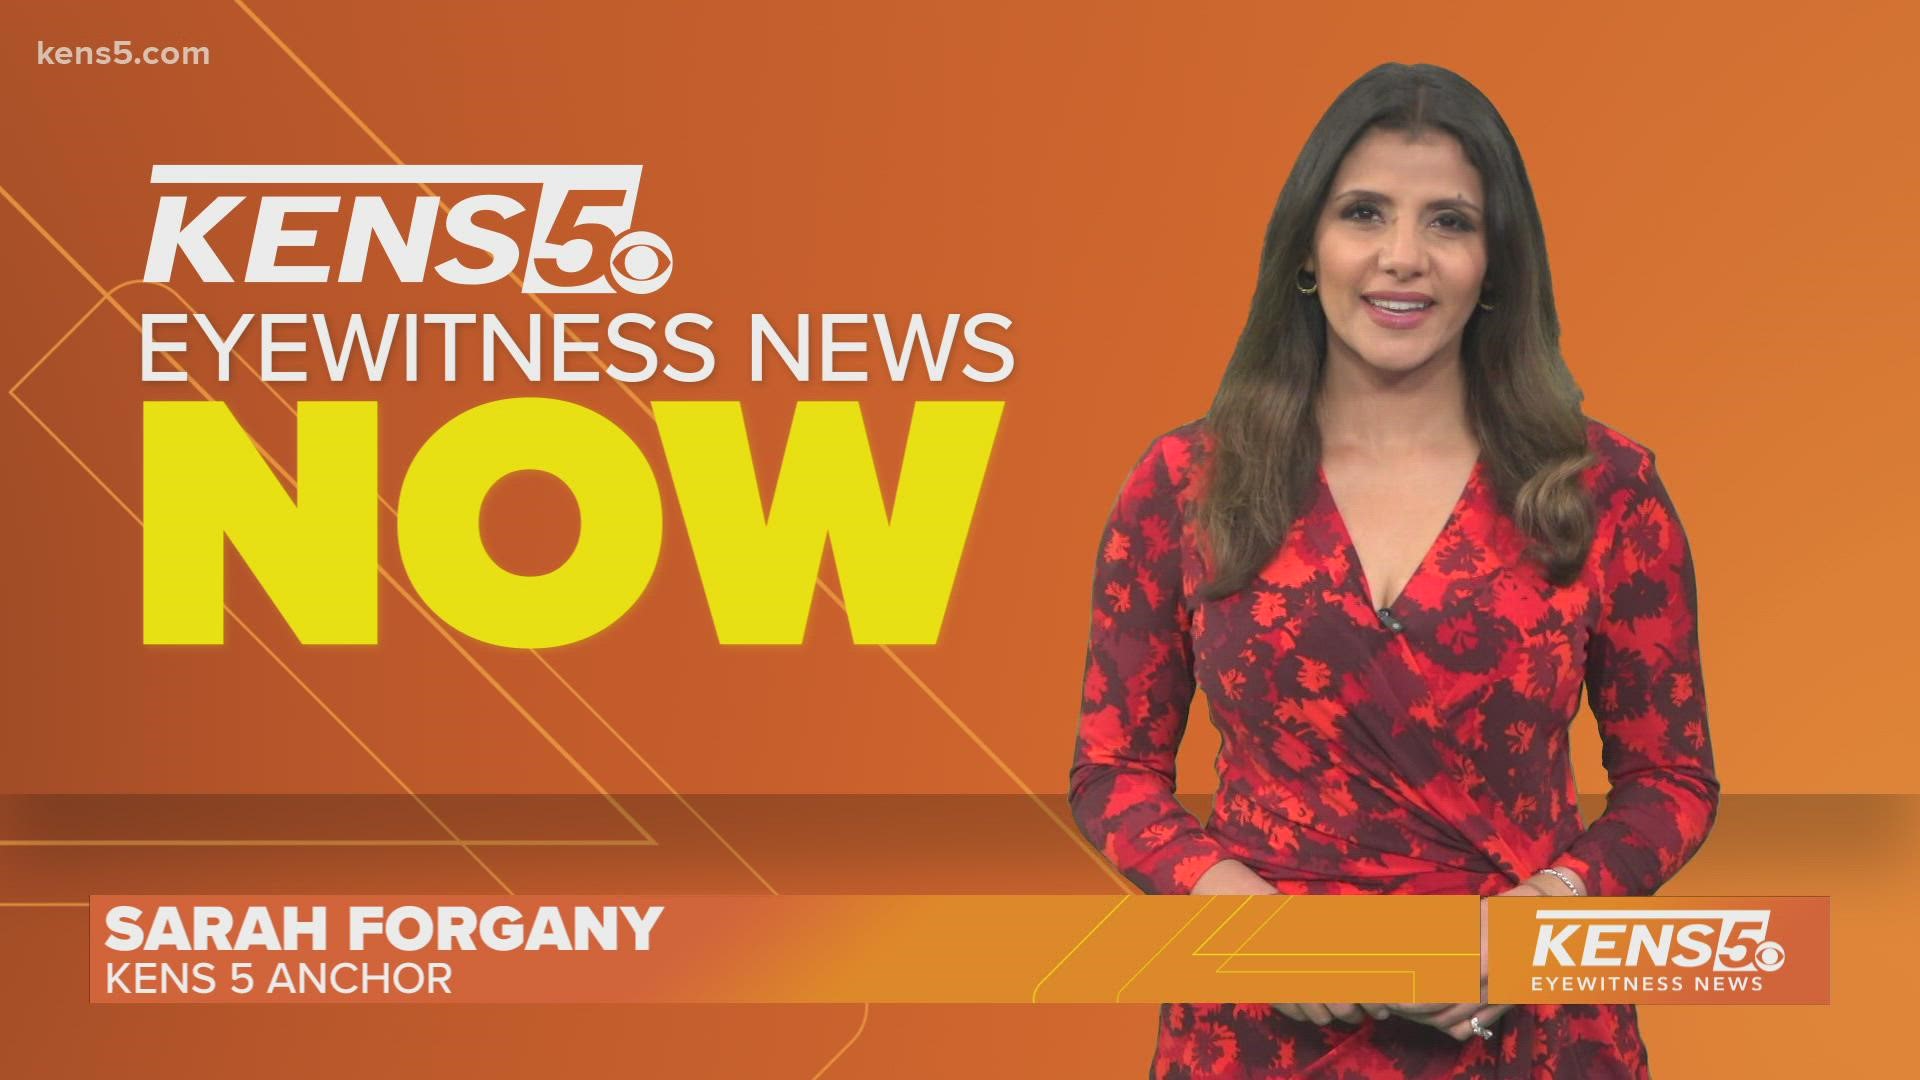 Follow us here to get the latest with Sarah Forgany every weekday from KENS 5.